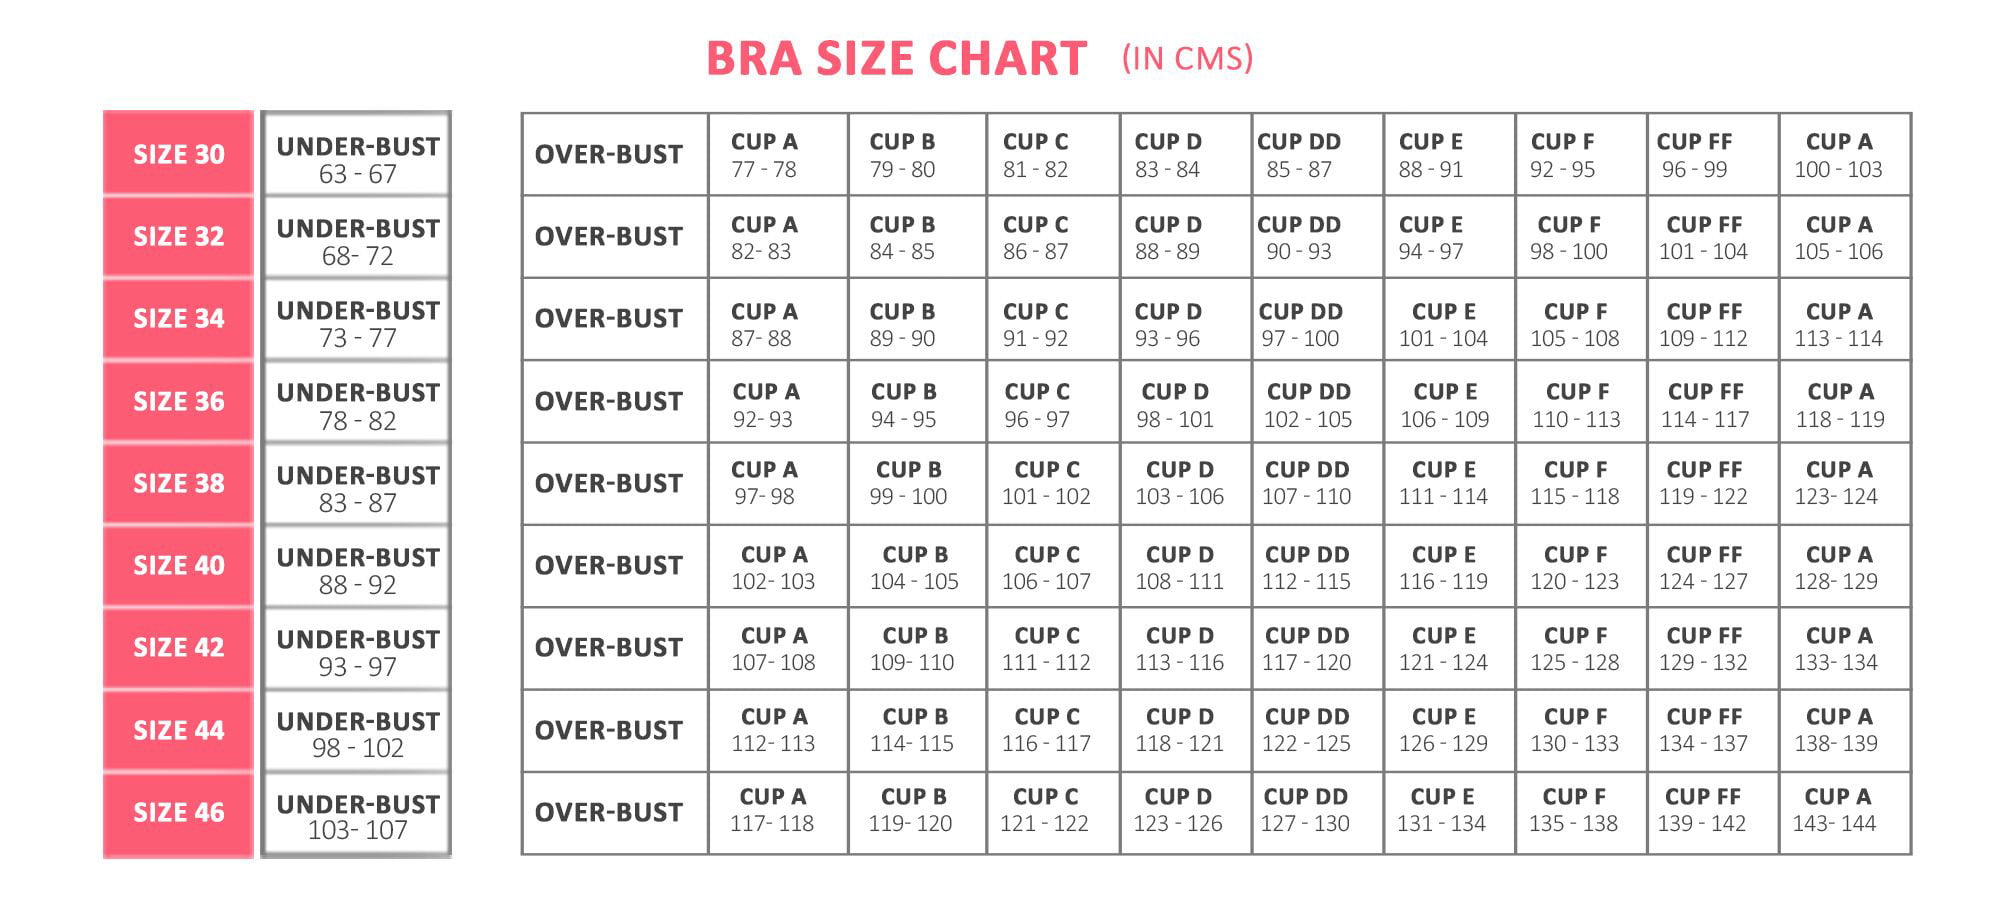 Women Bras 6 Pack of Bra B cup C cup D cup DD cup Size 36D (C8208